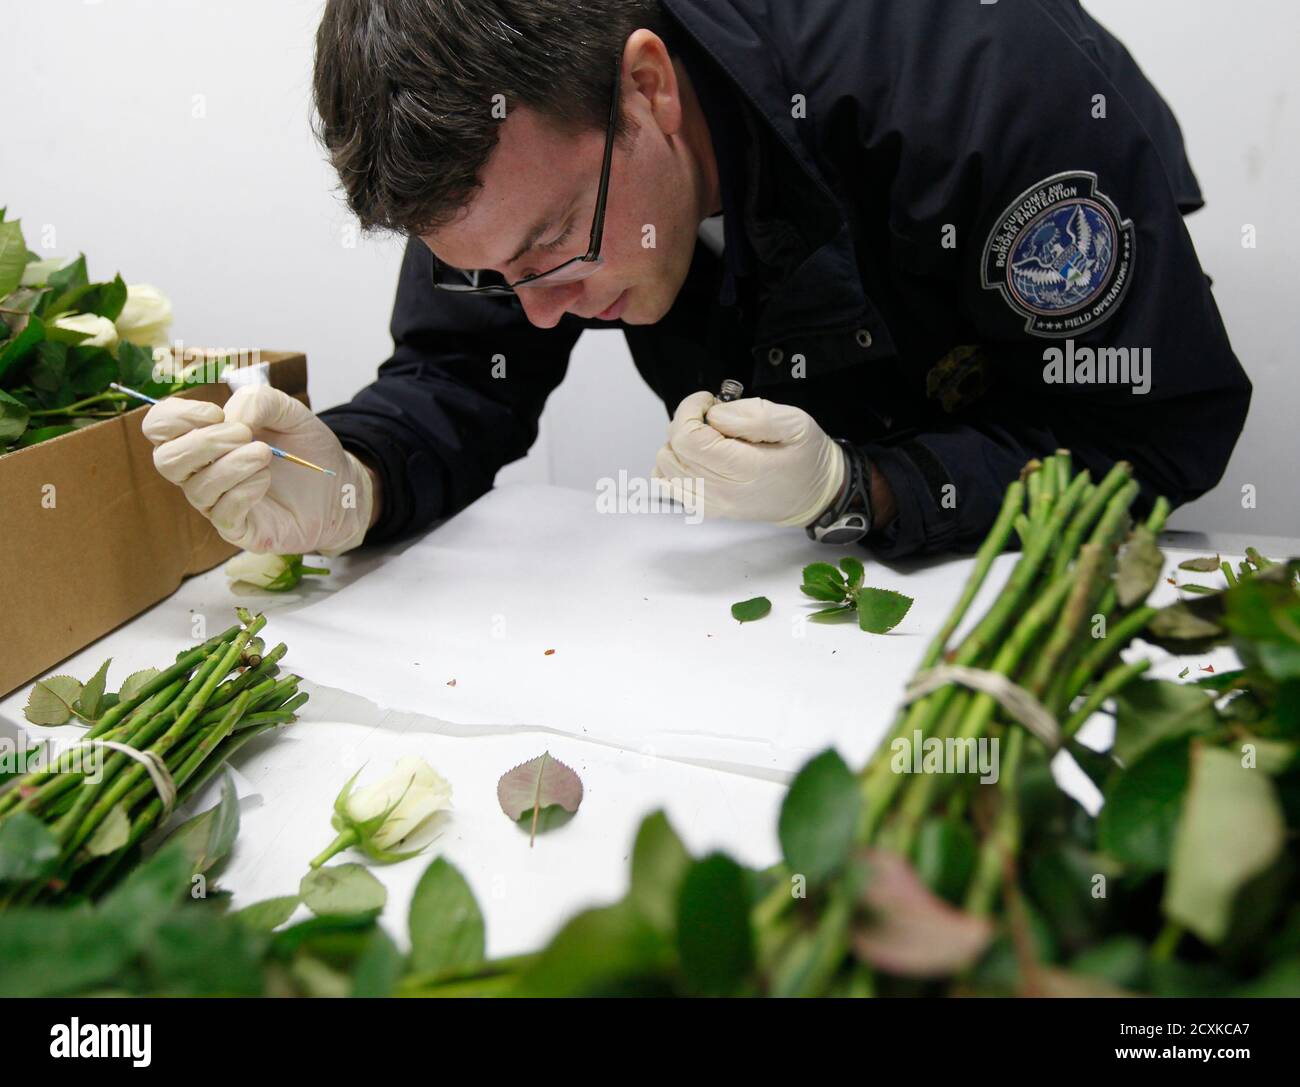 Justin Vitello,  a U.S. Customs and Border Protection Agriculture Inspection officer, uses a magnifying glass to look for any pests that might have been dislodged during his inspection of this box of roses at United Parcel Service's shipping facility at the Miami International Airport in Miami, Florida February 10, 2012. At ports of entry, CBP agriculture specialists ensure that plant pests and plant diseases are detected and prevented from being introduced into the U.S. where they could cause harm to our flower industry, our agriculture and our economy. REUTERS/Andrew Innerarity (UNITED STATE Stock Photo